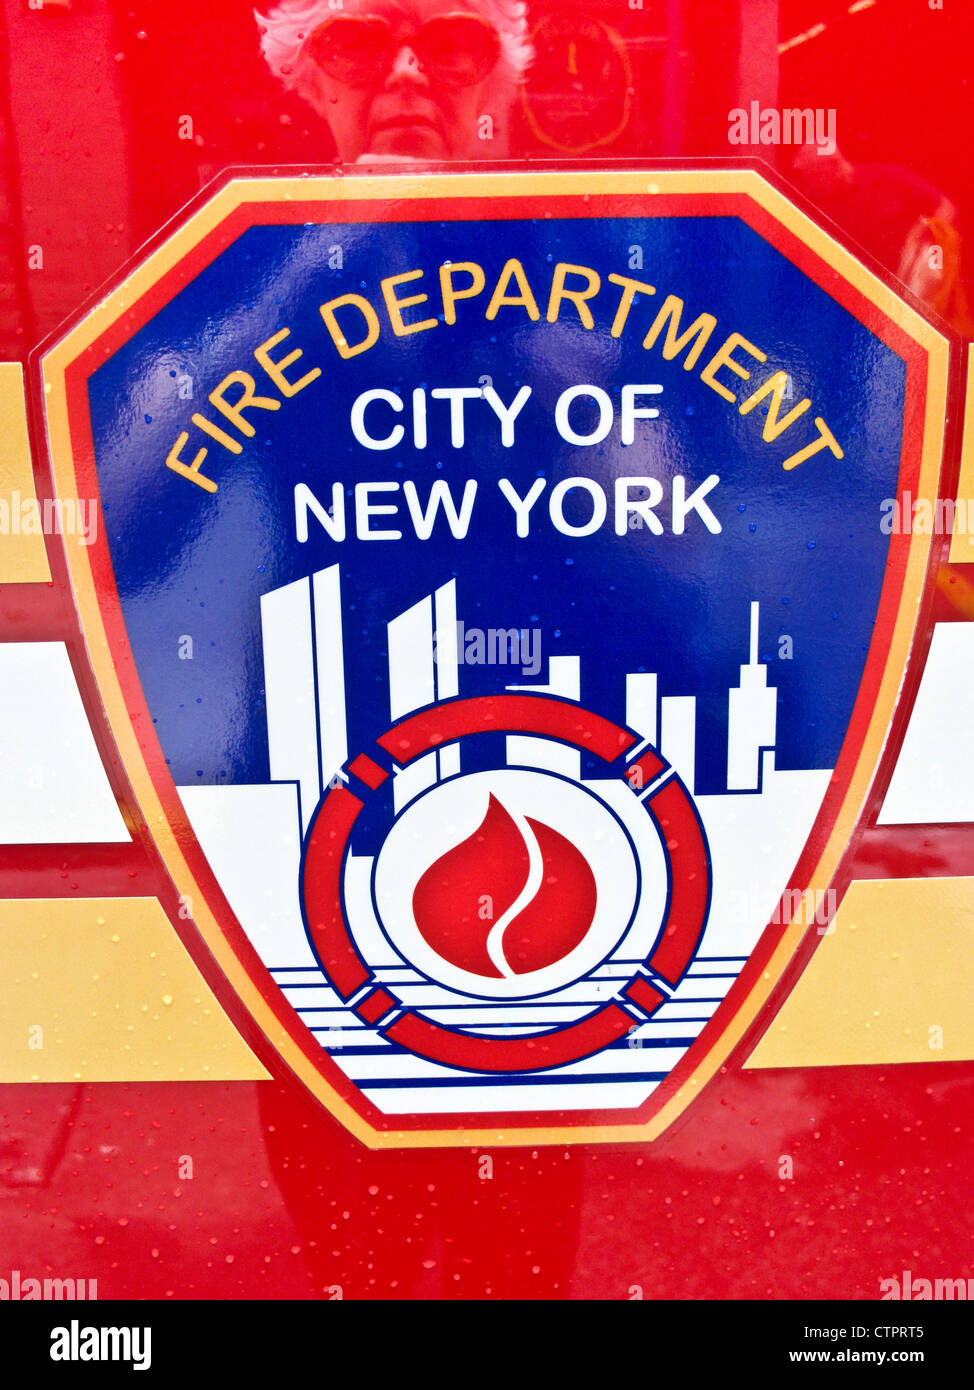 red white blue & gold City of New York Fire Department FDNY logo on side of freshly washed fire rescue truck firetruck Manhattan Stock Photo